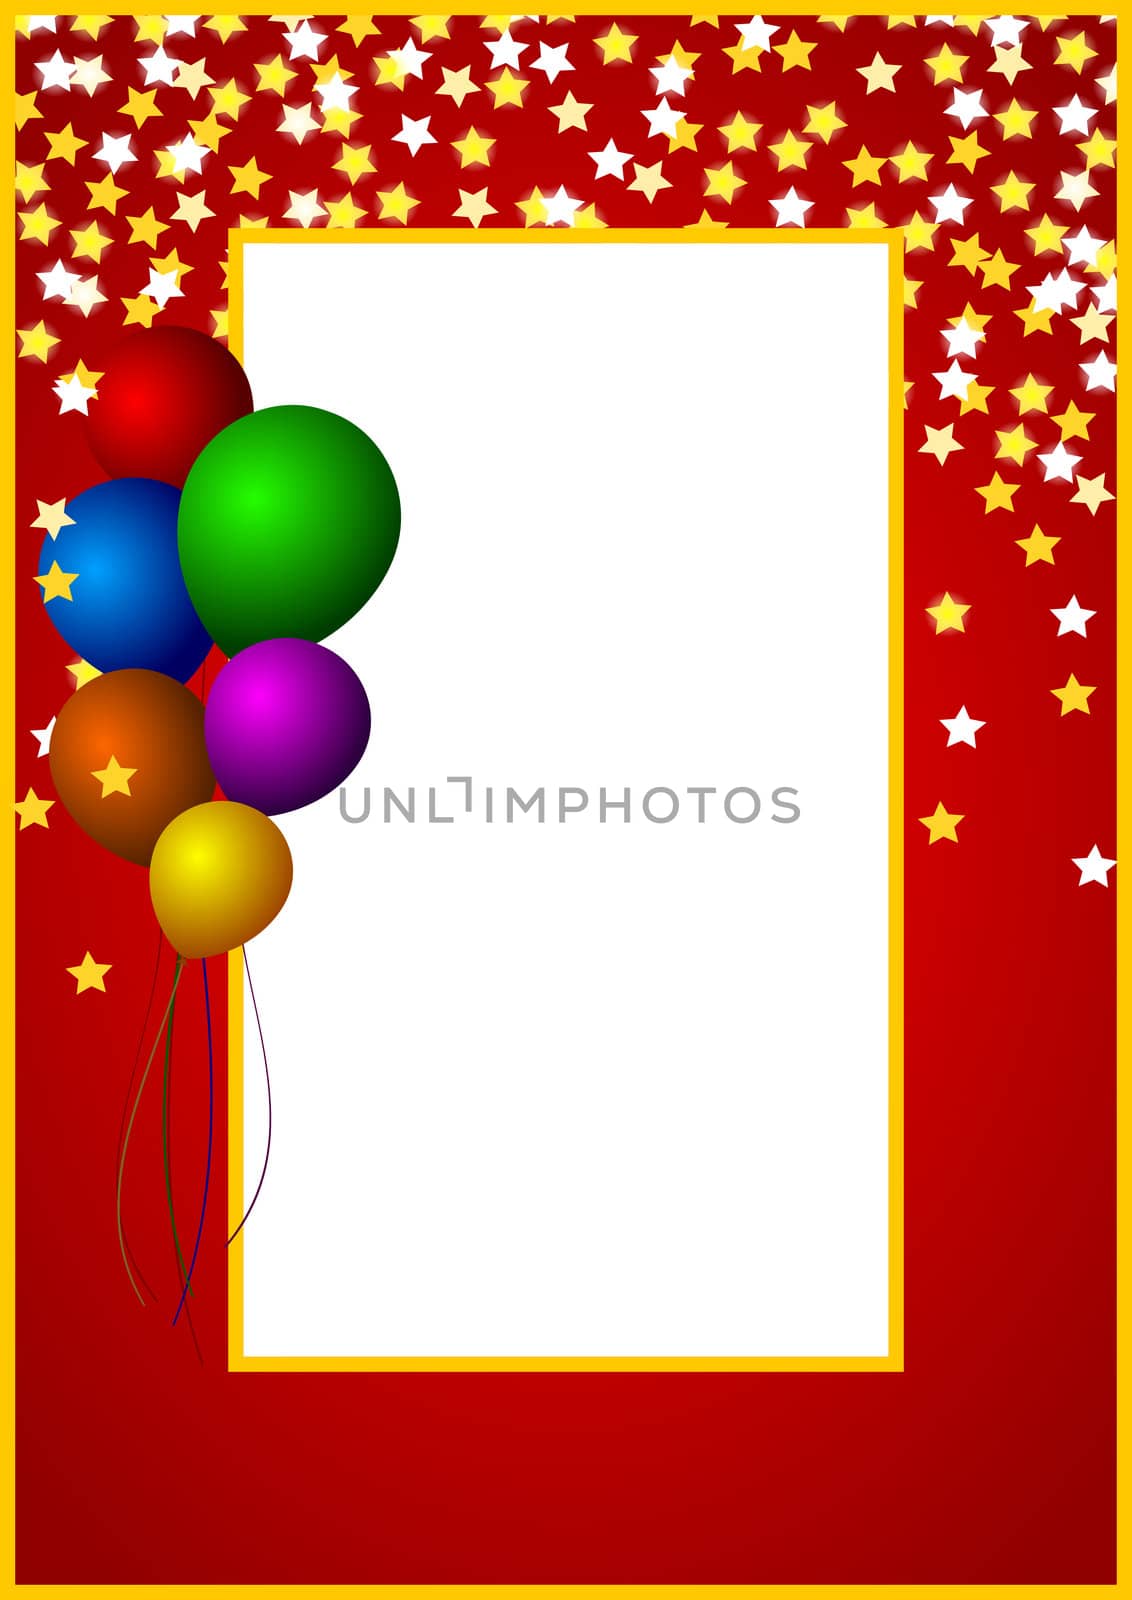 colorful abstract background with balloons by alexwhite